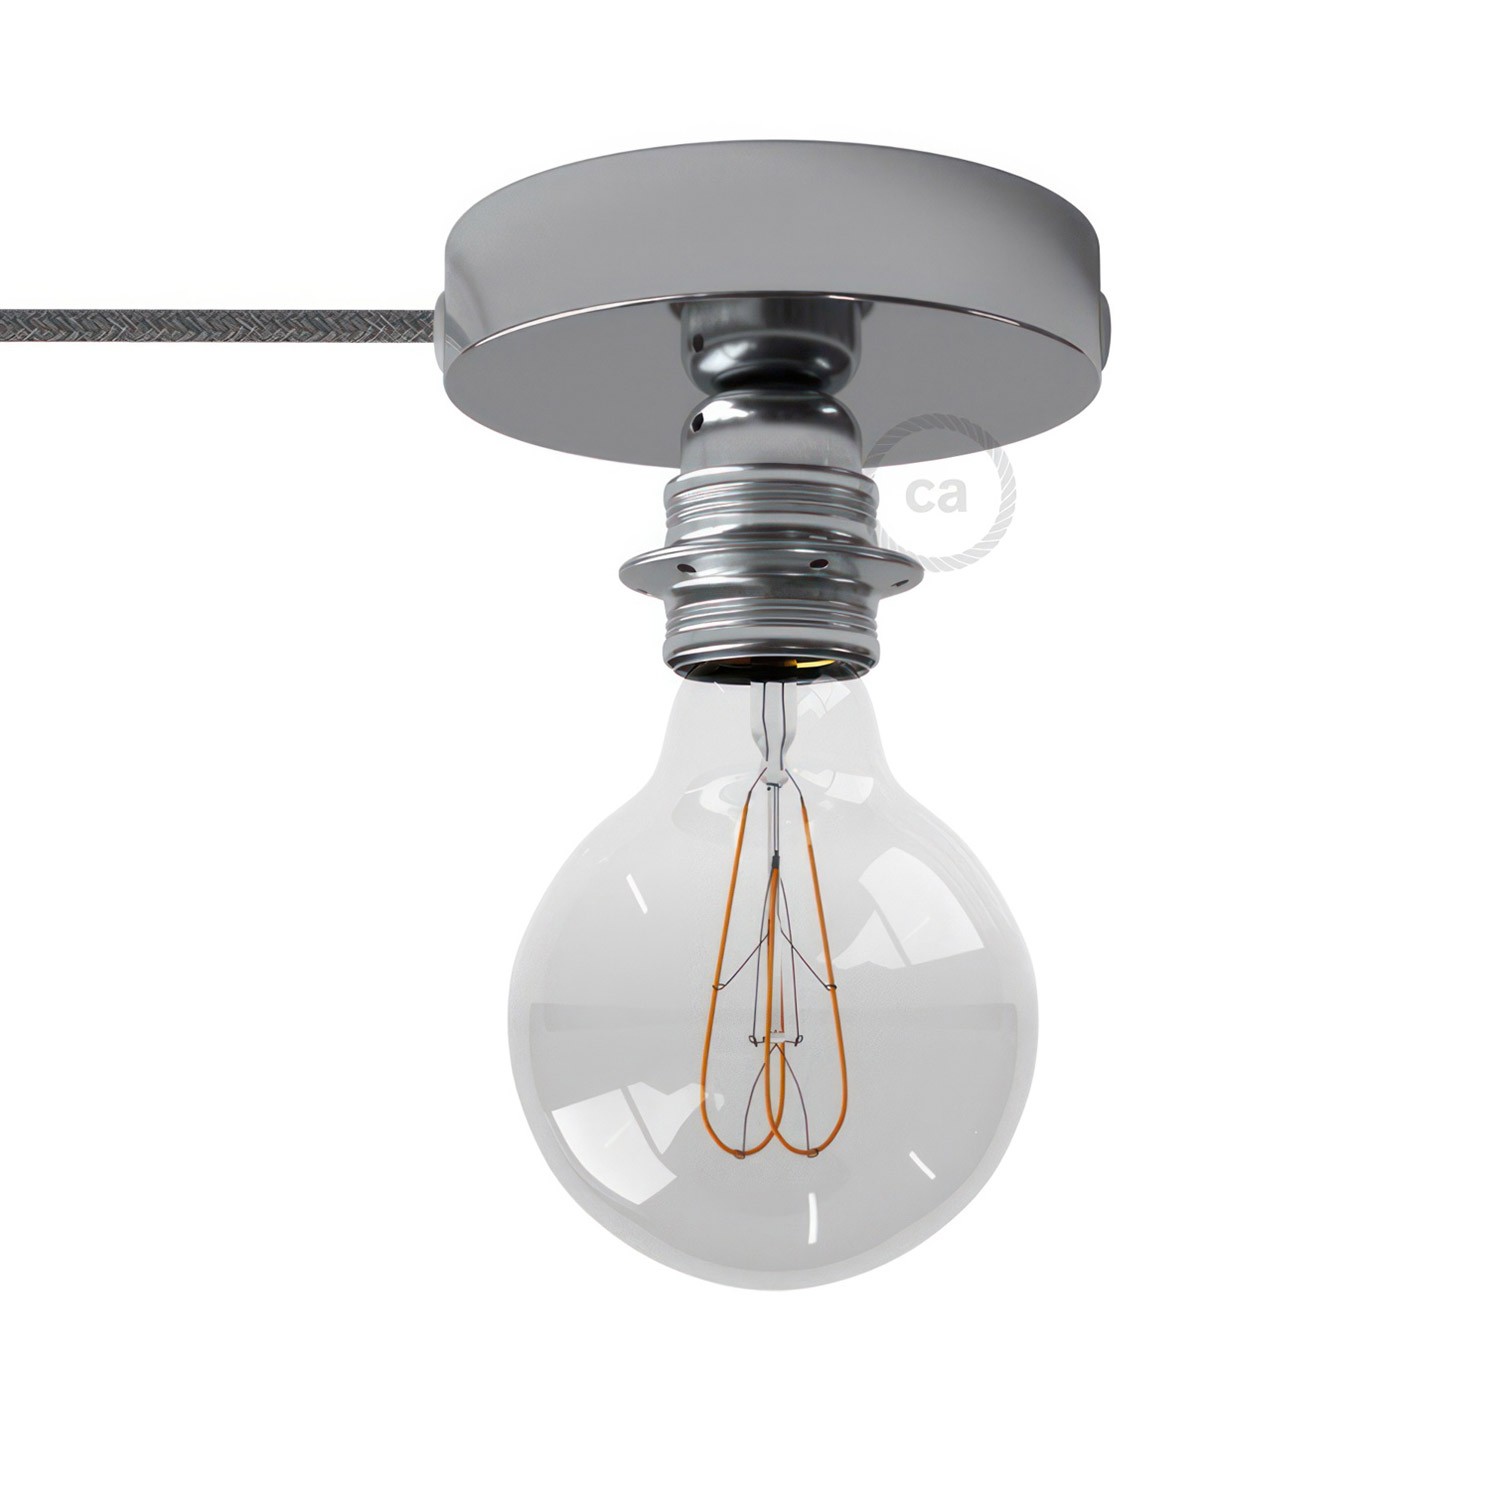 Spostaluce, the metal light source with E27 threaded lamp holder, fabric cable and side holes